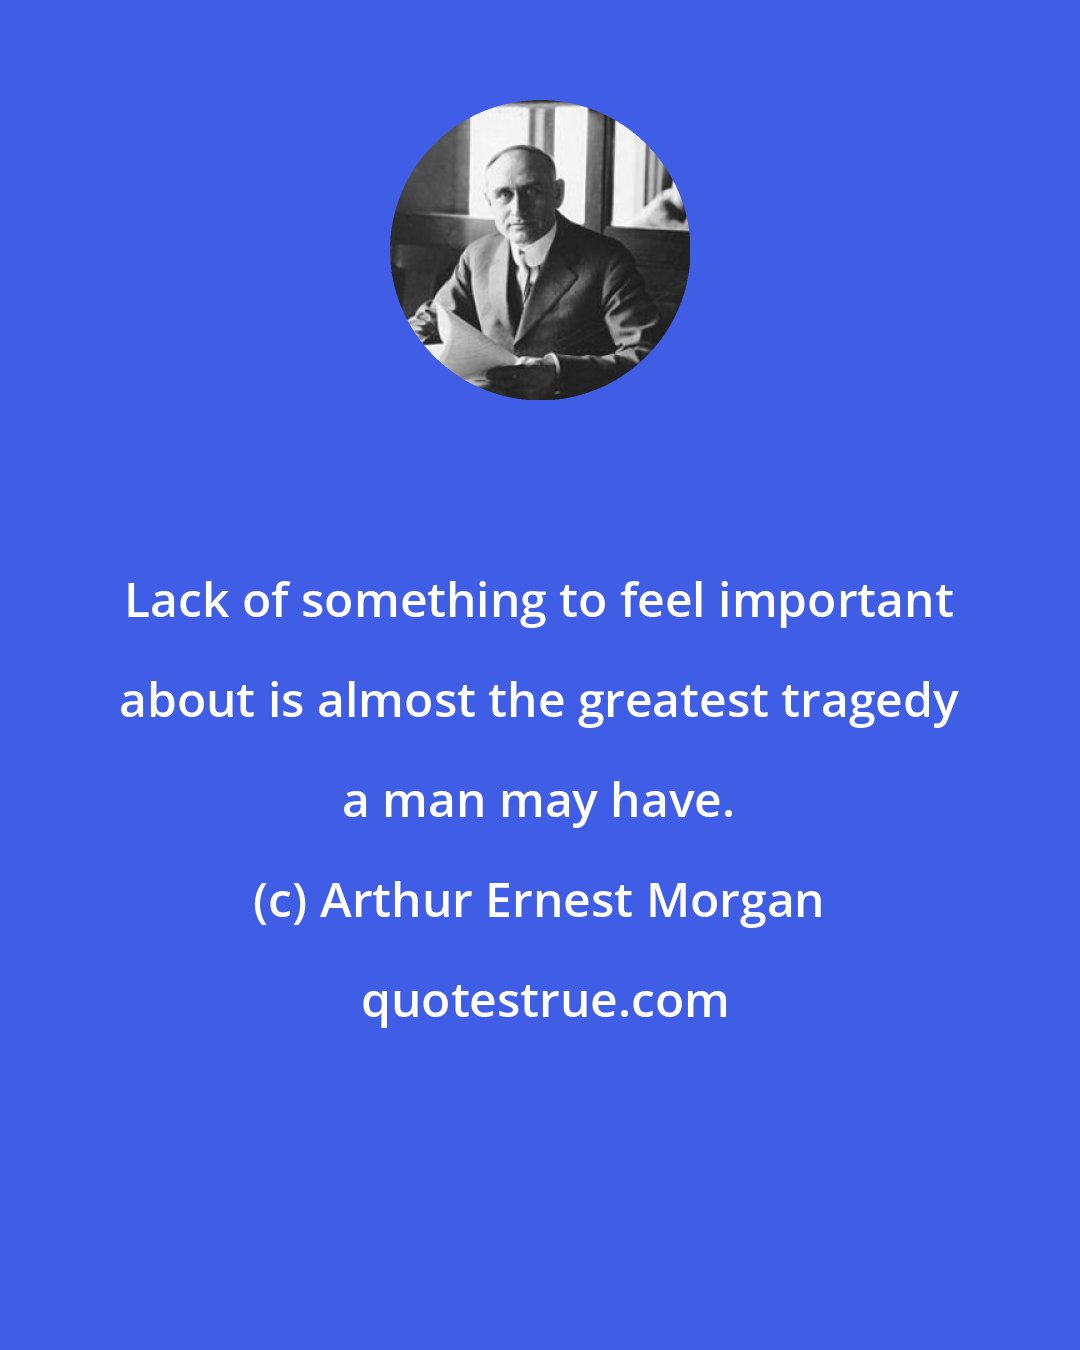 Arthur Ernest Morgan: Lack of something to feel important about is almost the greatest tragedy a man may have.